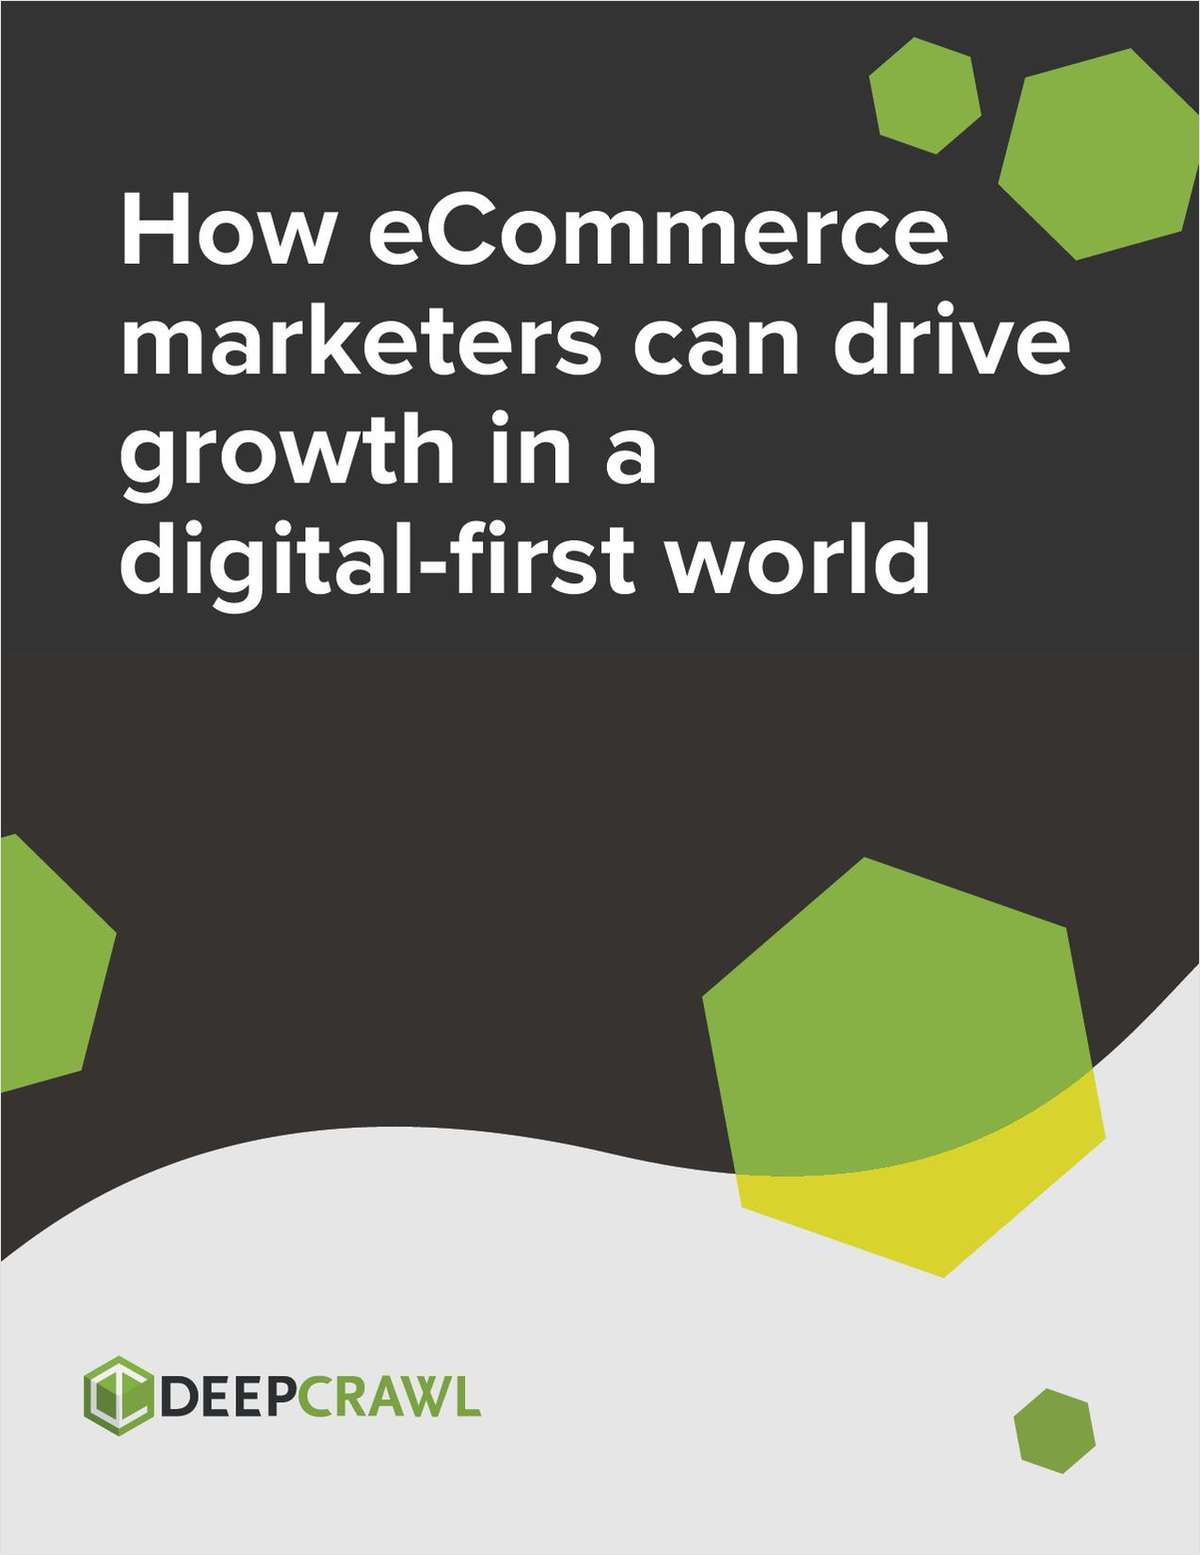 New Whitepaper: How eCommerce Marketers Can Drive Growth in a Digital-First World